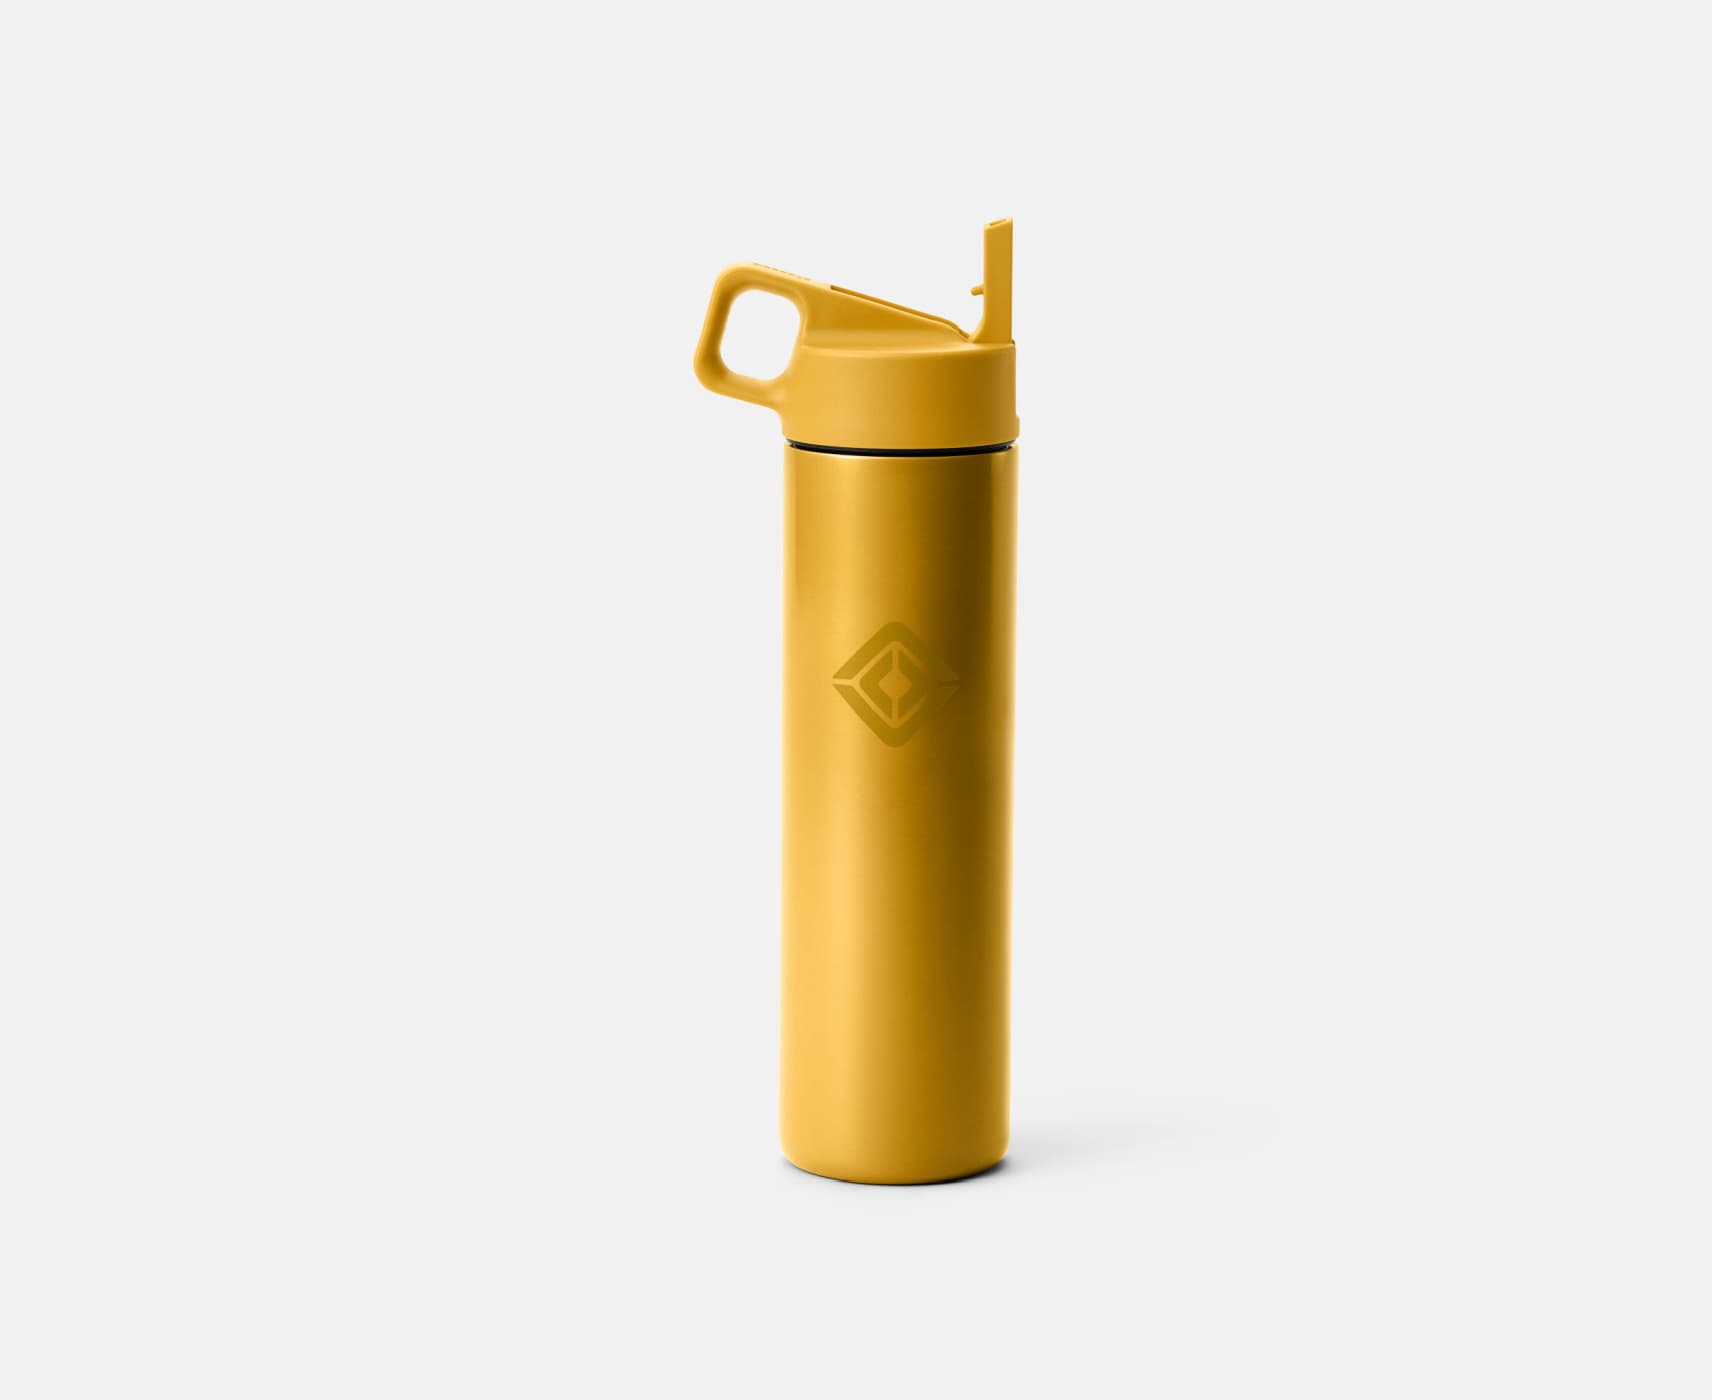 https://media.rivian.com/rivian-main/image/upload/f_auto,q_auto:eco/v1/rivian-com/gearshop/20%20oz%20Wide%20Mouth%20Bottle%20with%20Straw/Compass%20Yellow/20-oz-Wide-Mouth-Compass-Yellow-Primary-01_kkebij